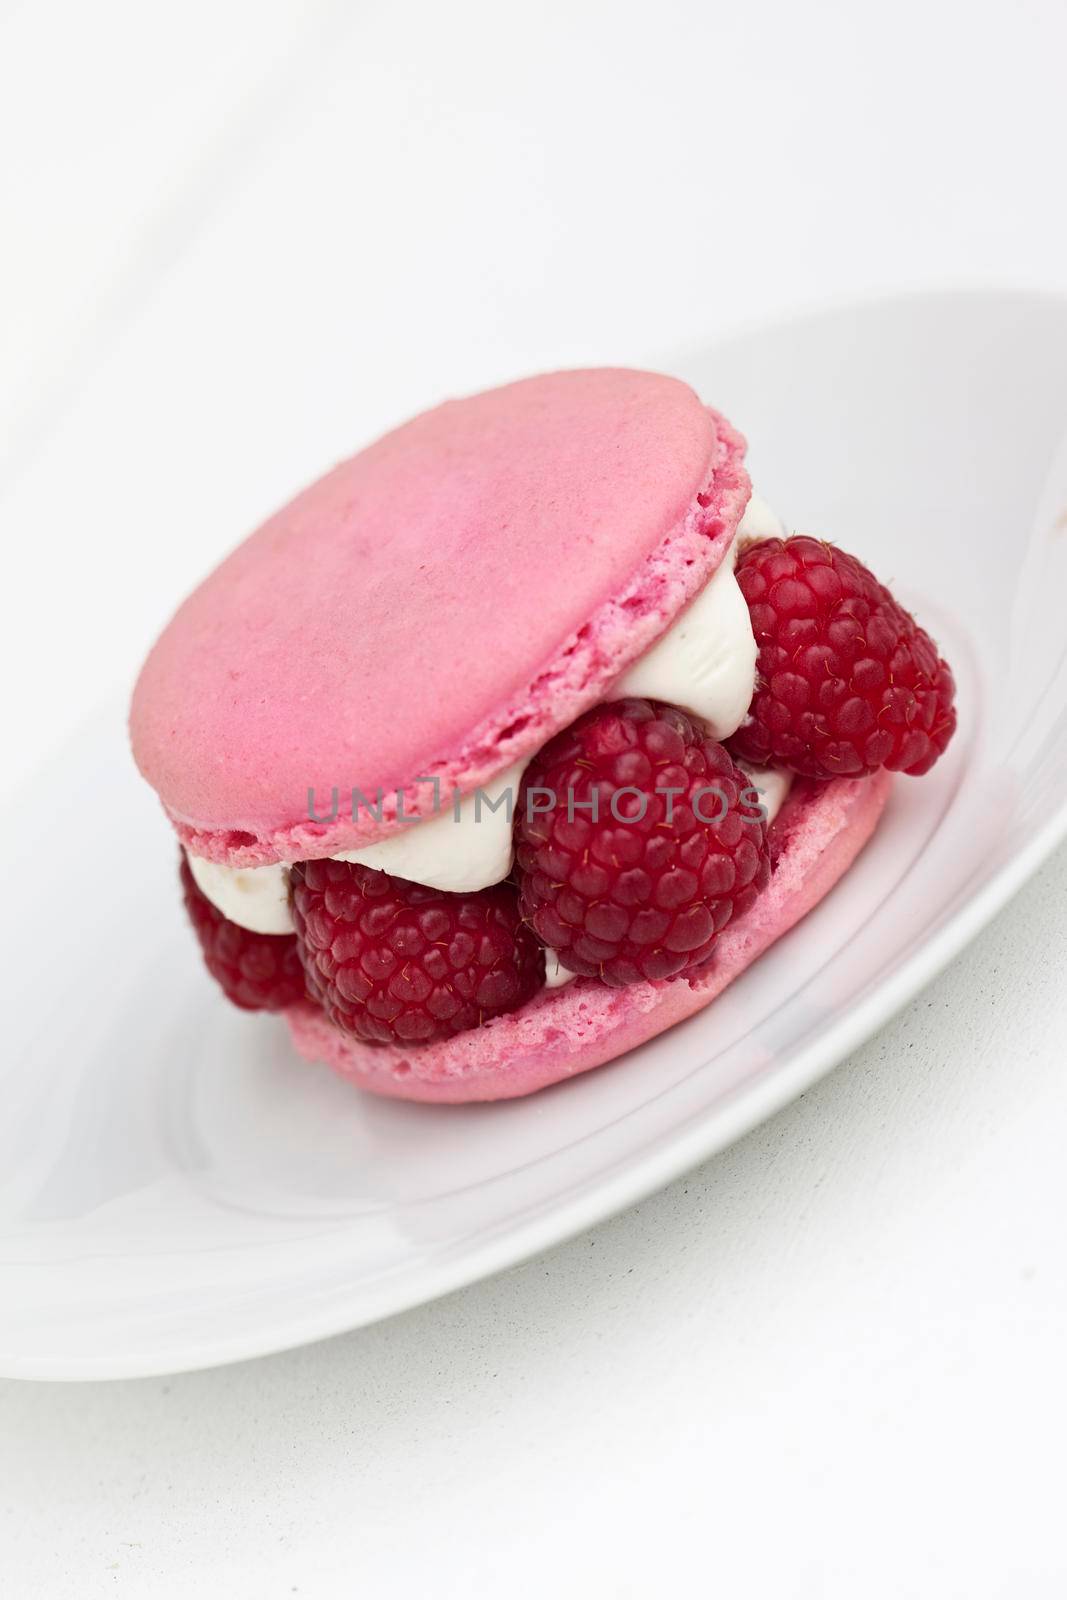 Close up of a Raspberry macaroon and Chantilly cream